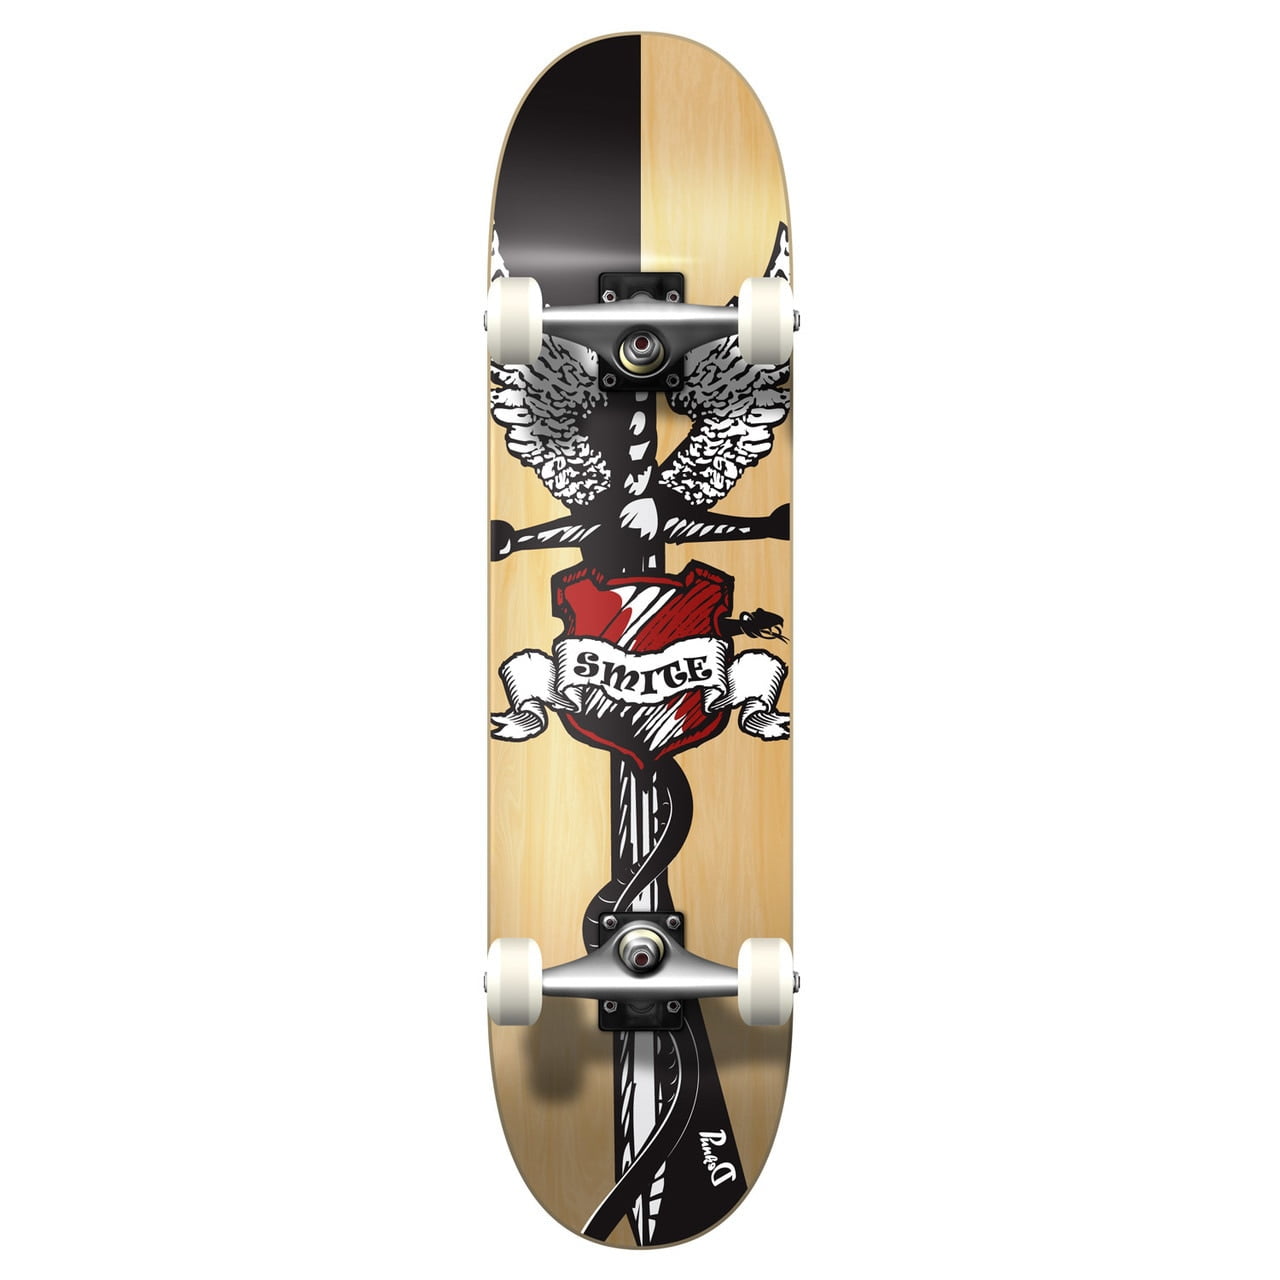 Yocaher Graphic Hot Rod Ragz Complete Skateboard 